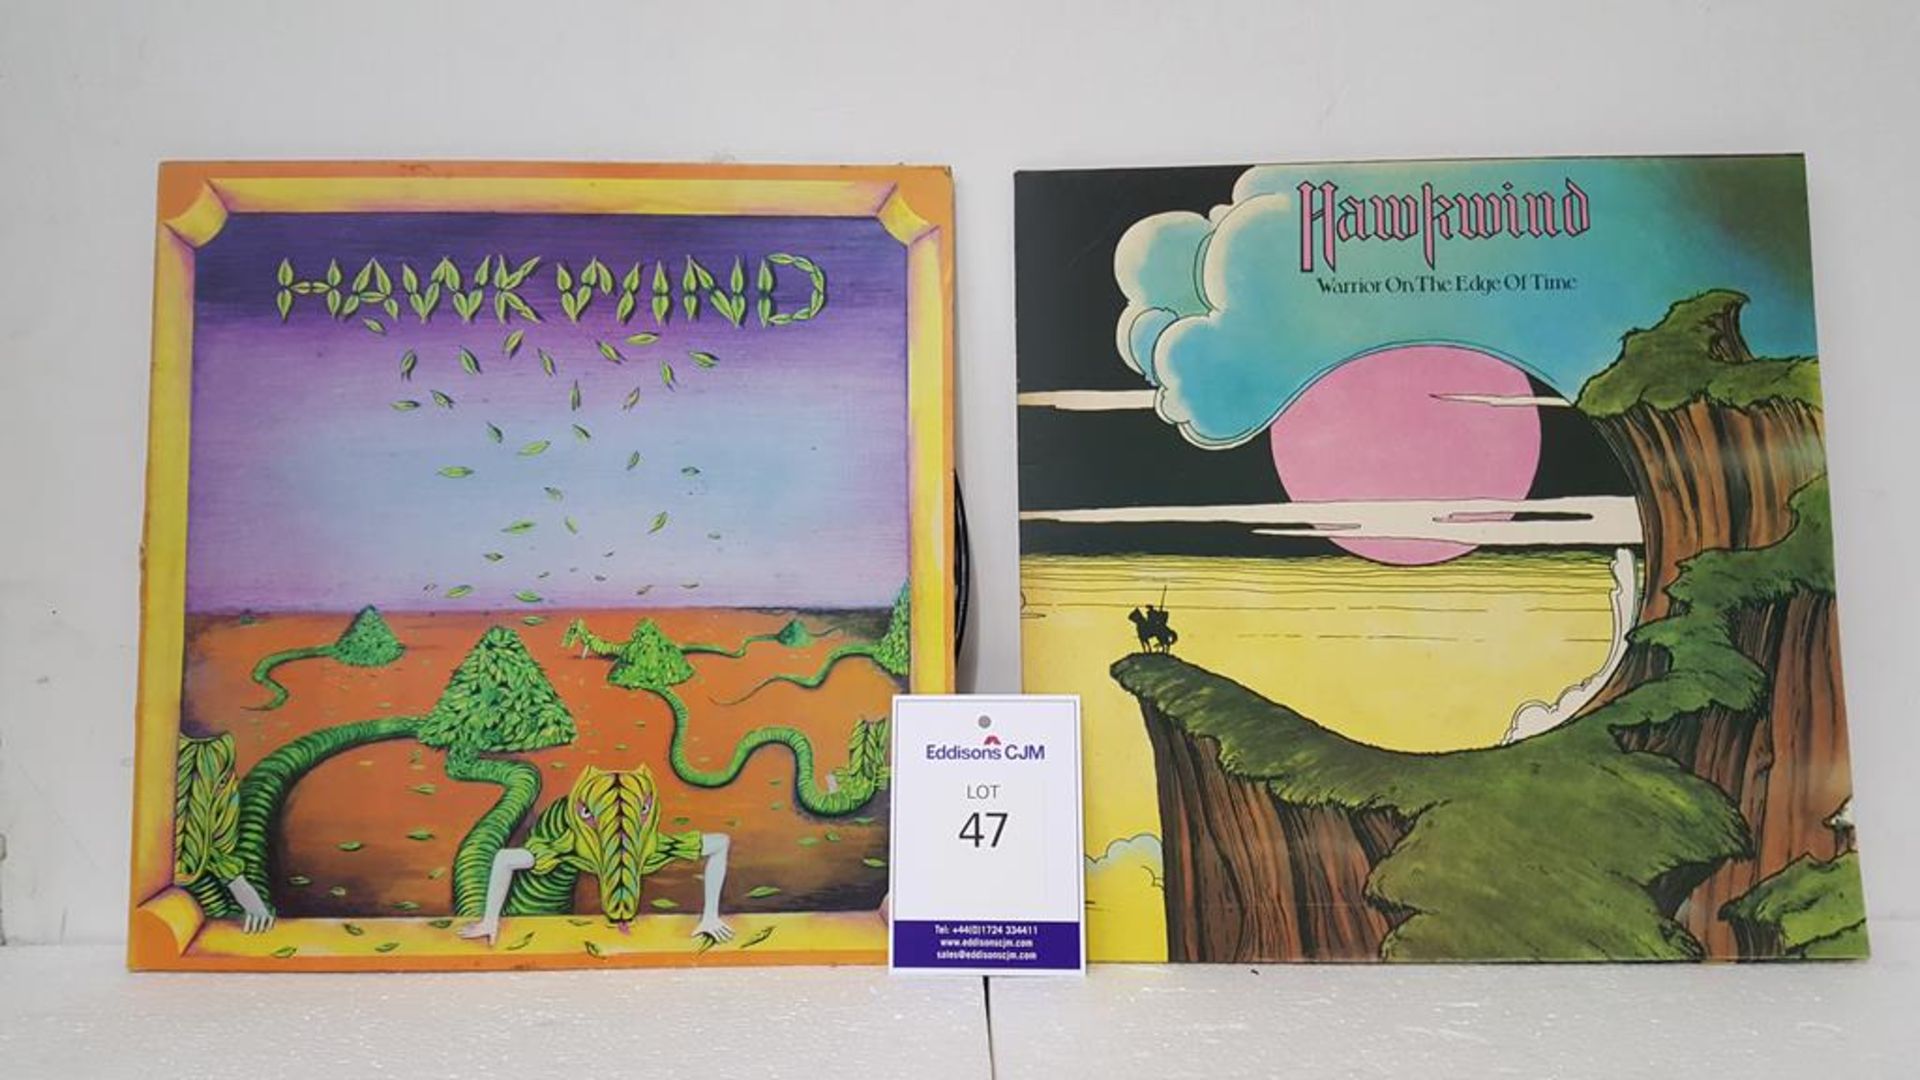 Hawkwind 'Warrior on the Edge of Time' and 'Hawkwind' LPs